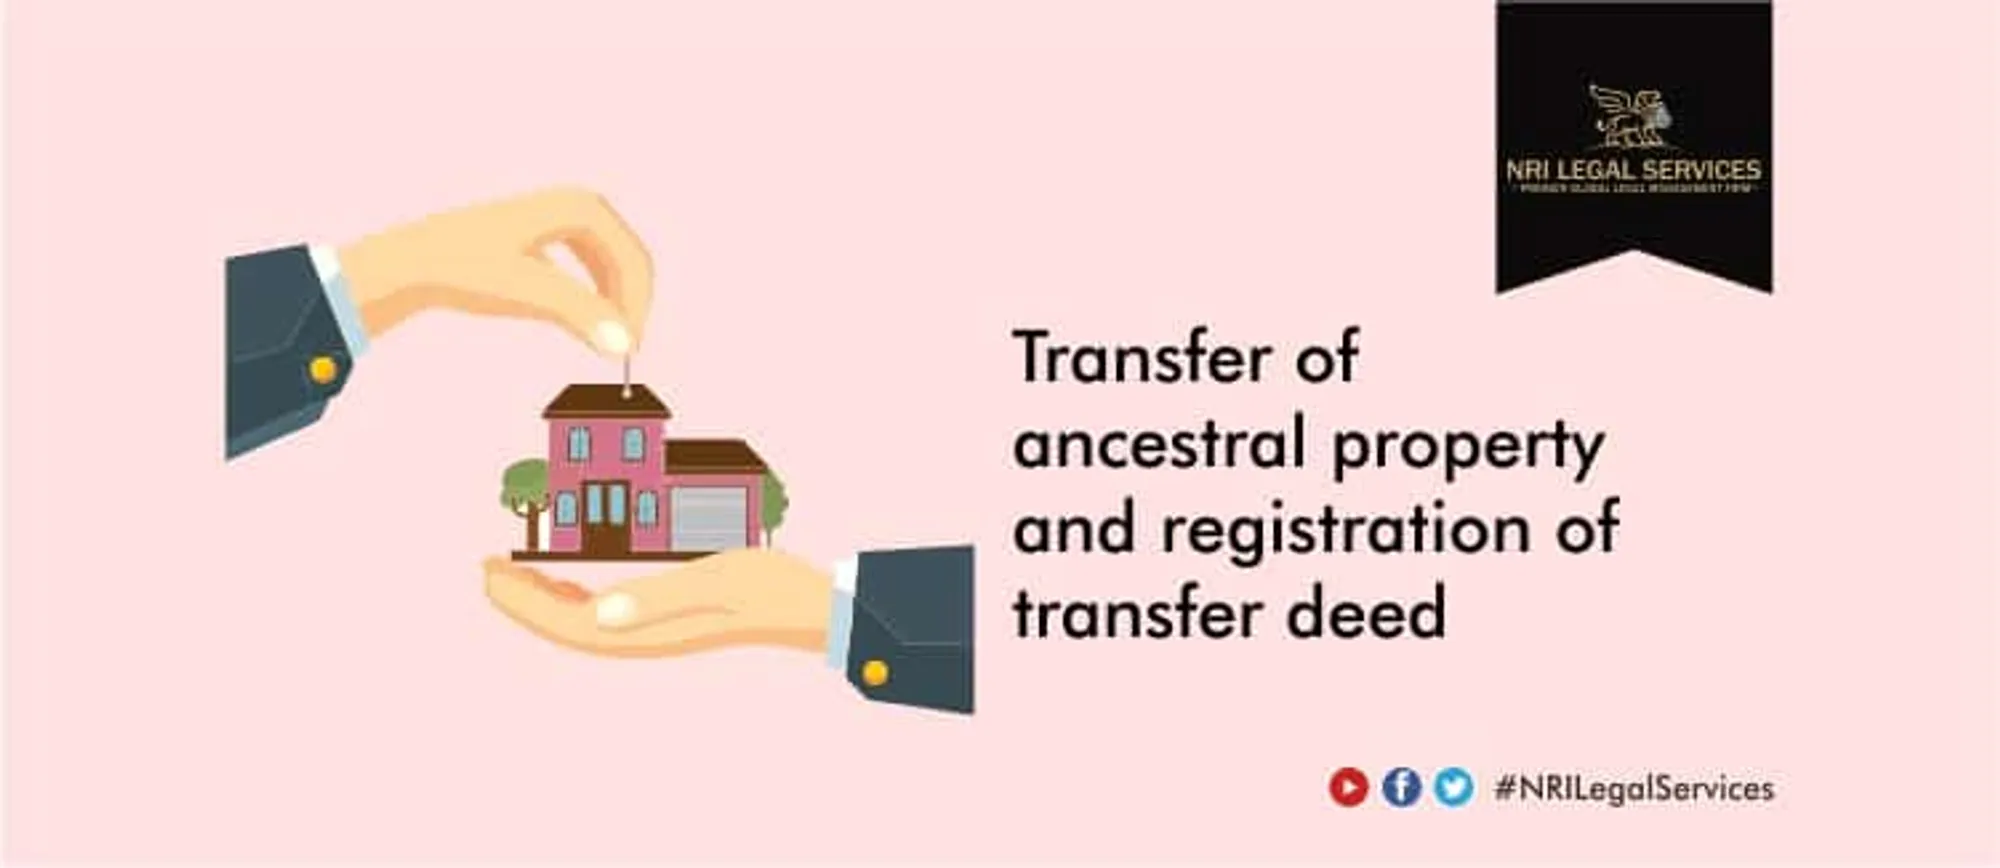 Transfer of ancestral property and registration of transfer deed